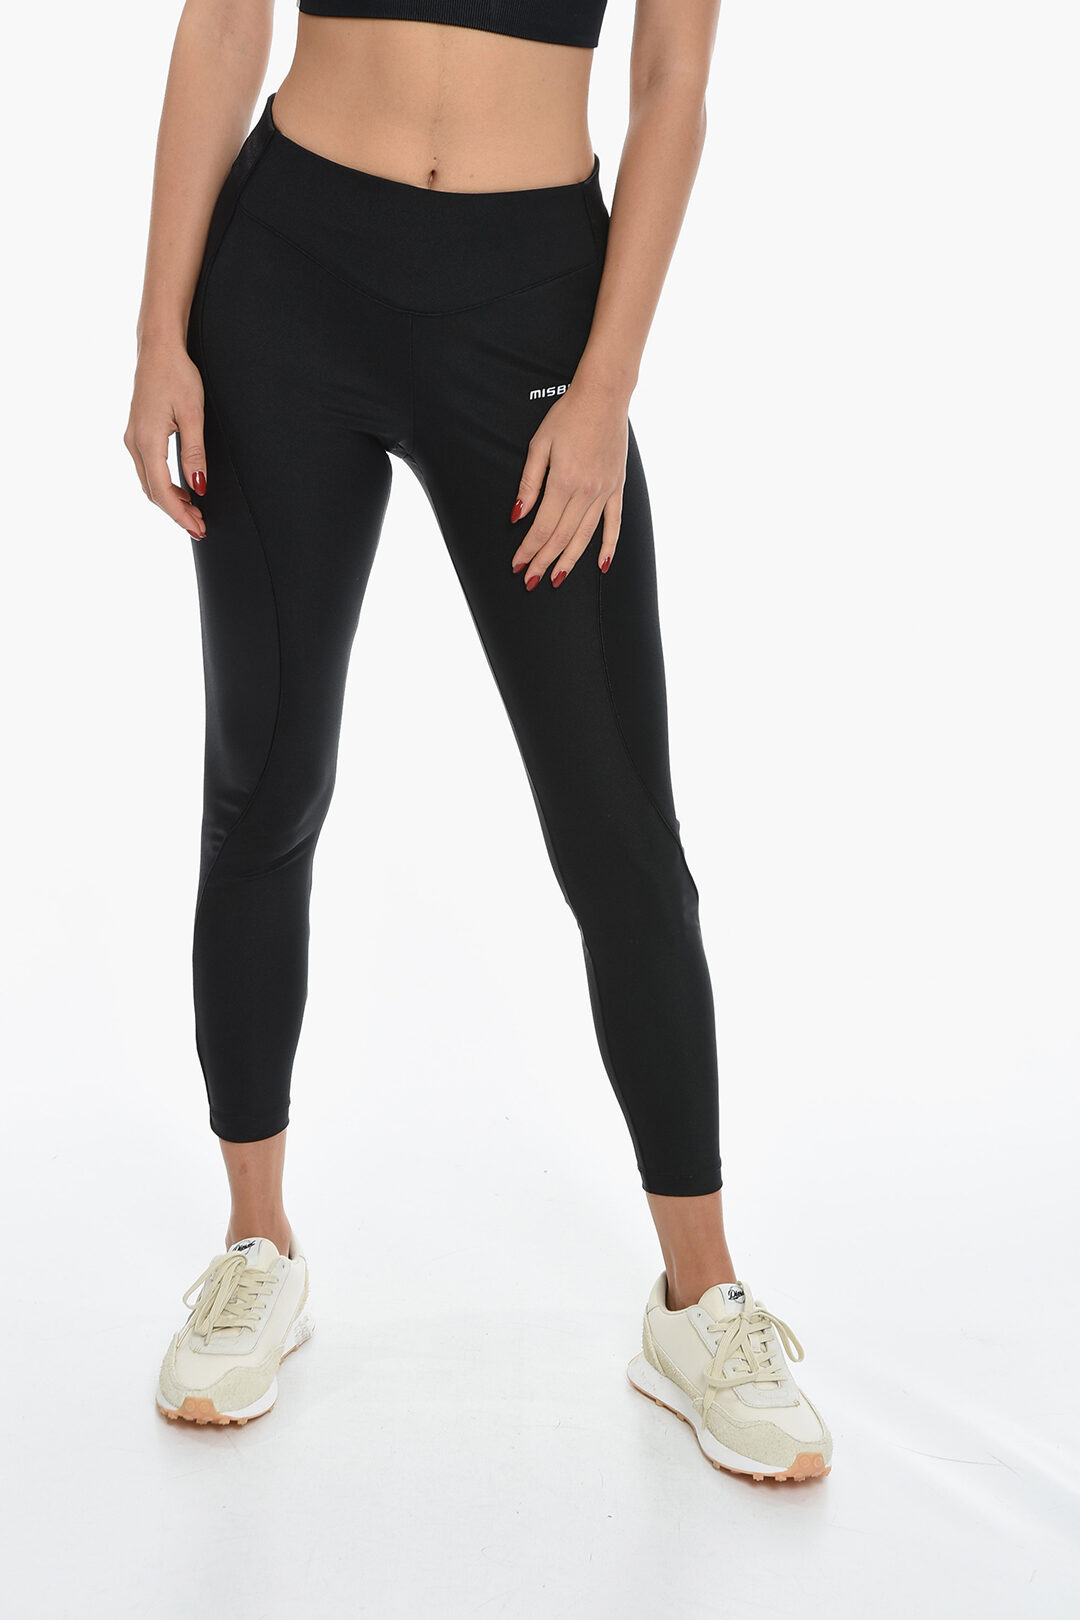 Philipp Plein Logoed Waistband CONTRAST Leggings with Lace Inserts women -  Glamood Outlet